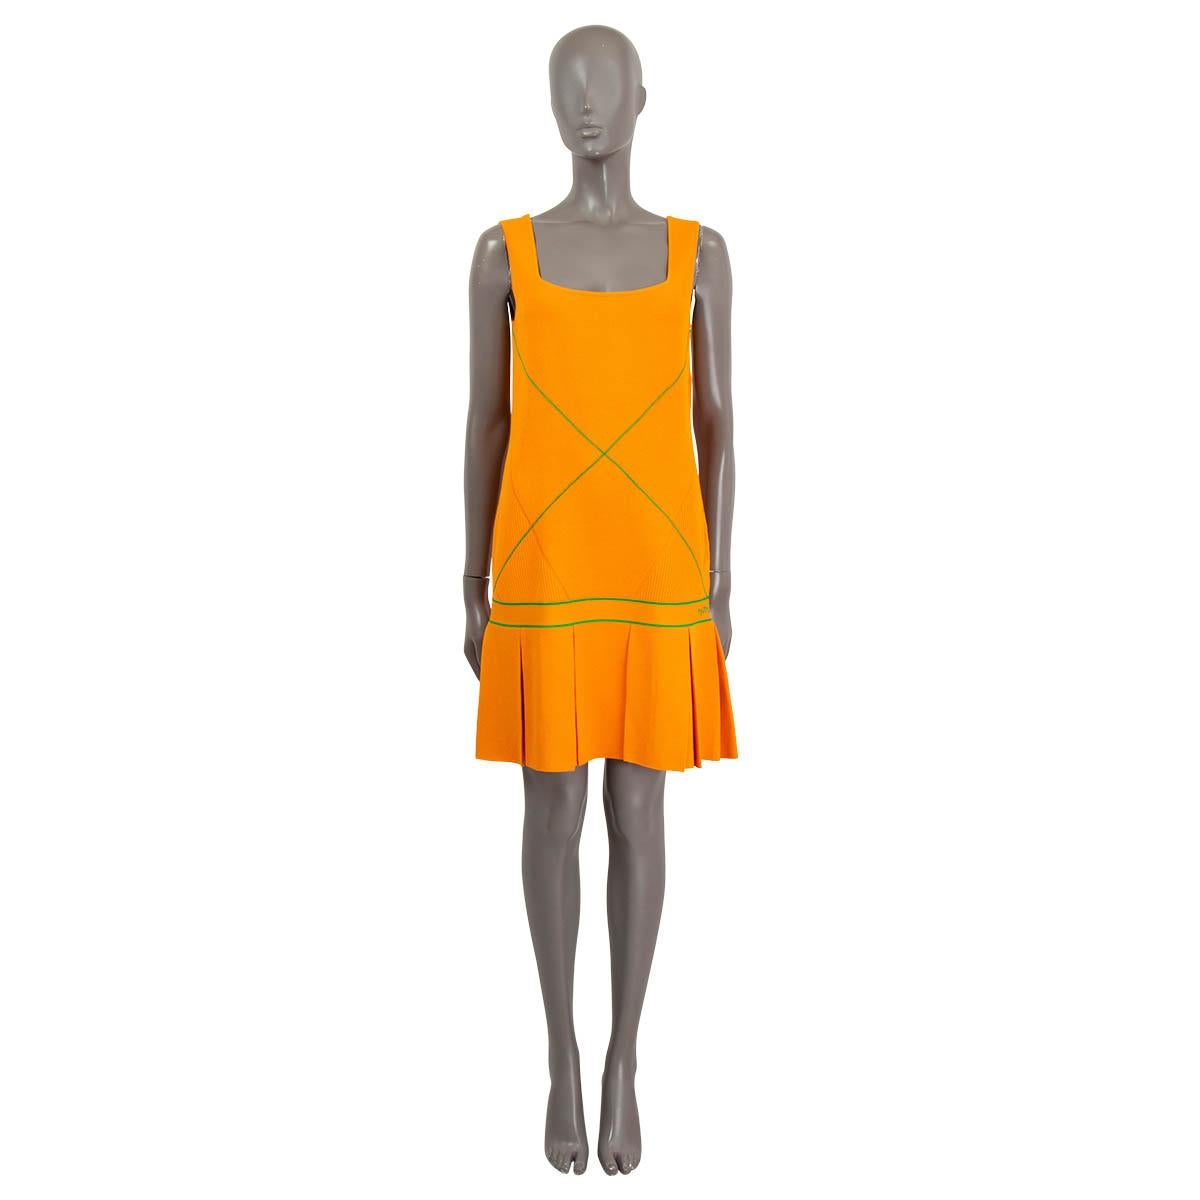 100% authentic Bottega Veneta sleeveless knit mini dress in orange and green viscose (76%), polyester (8%) and elastane (1%). Features square neck pleated at the hem and green fine stripes. Has been worn and is in excellent condition.

2022